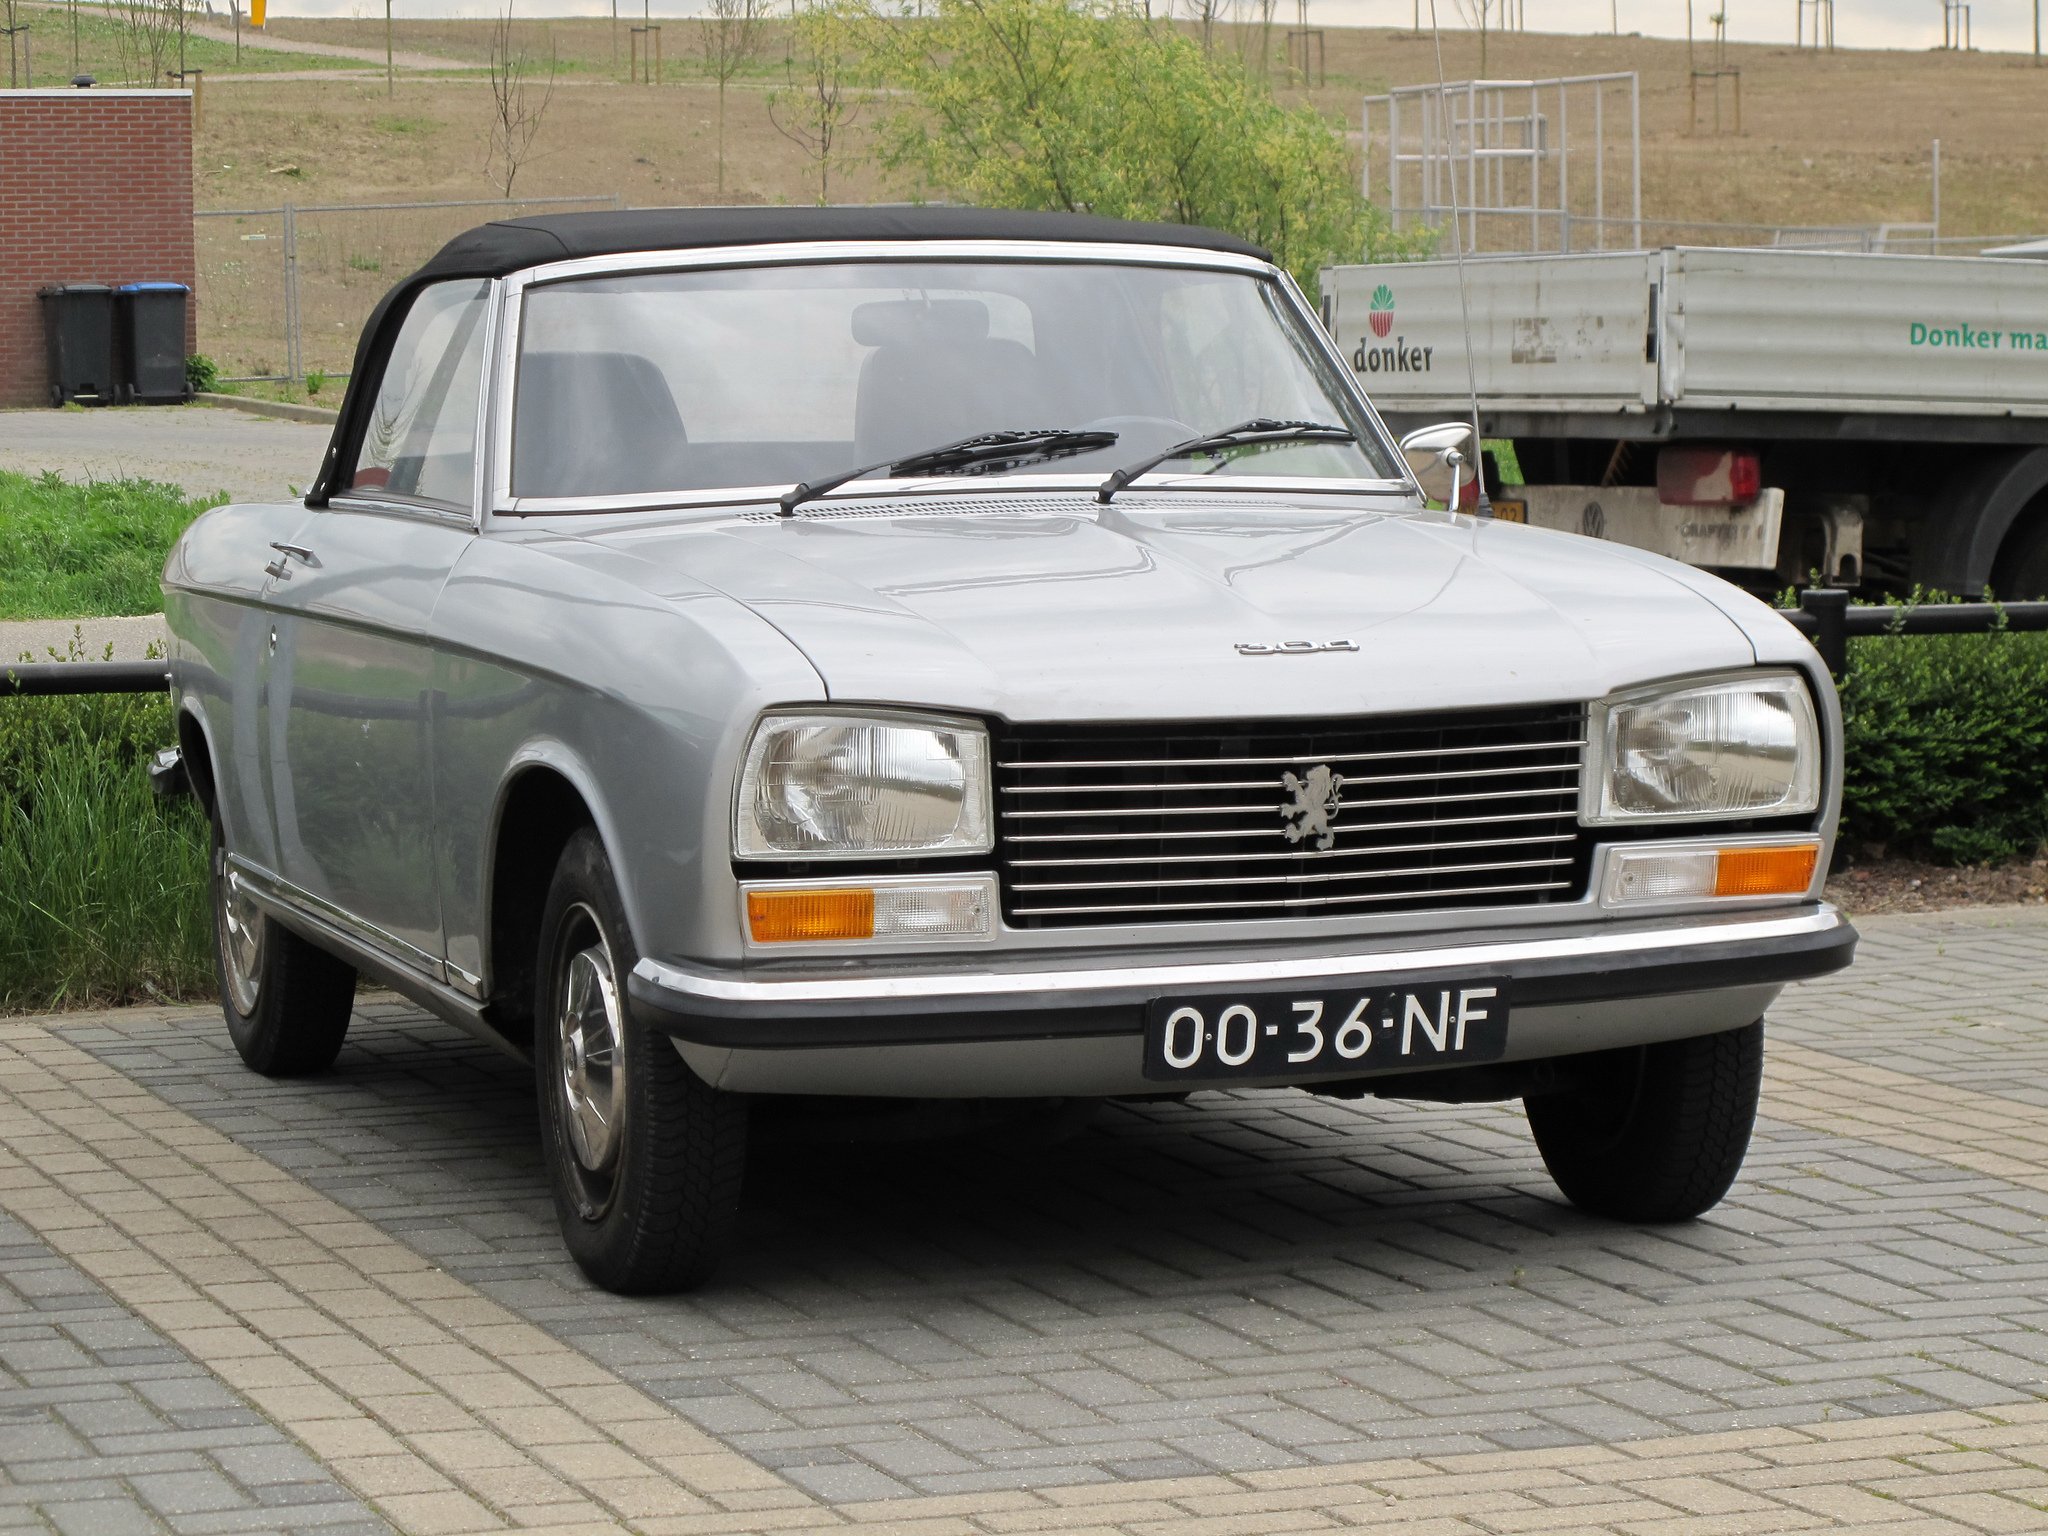 peugeot, 304, Cars, Classic, French, Convertible, Cabriolet Wallpaper